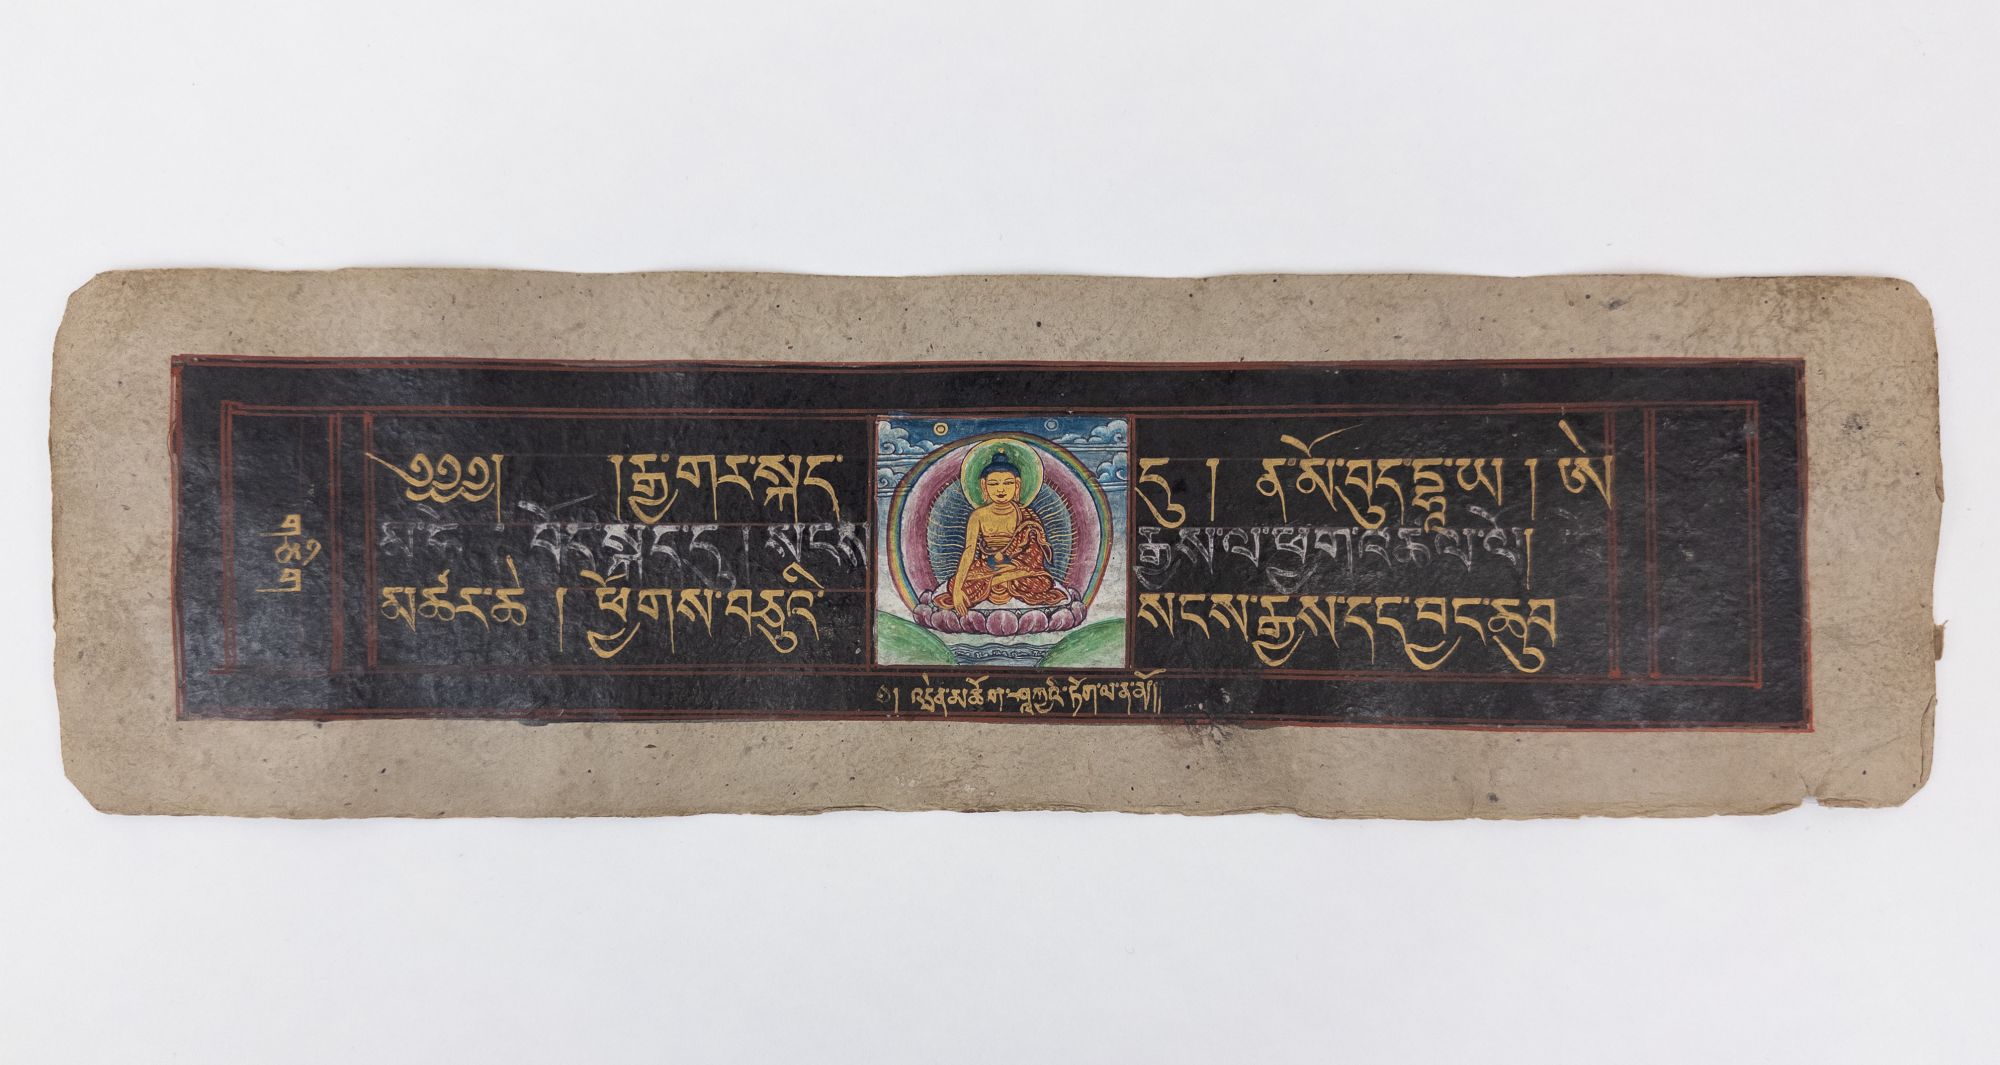 Product Image for THE PRECIOUS GARLAND OF CONFESSION AND ATONEMENT [Tibetan Buddhist Manuscript]